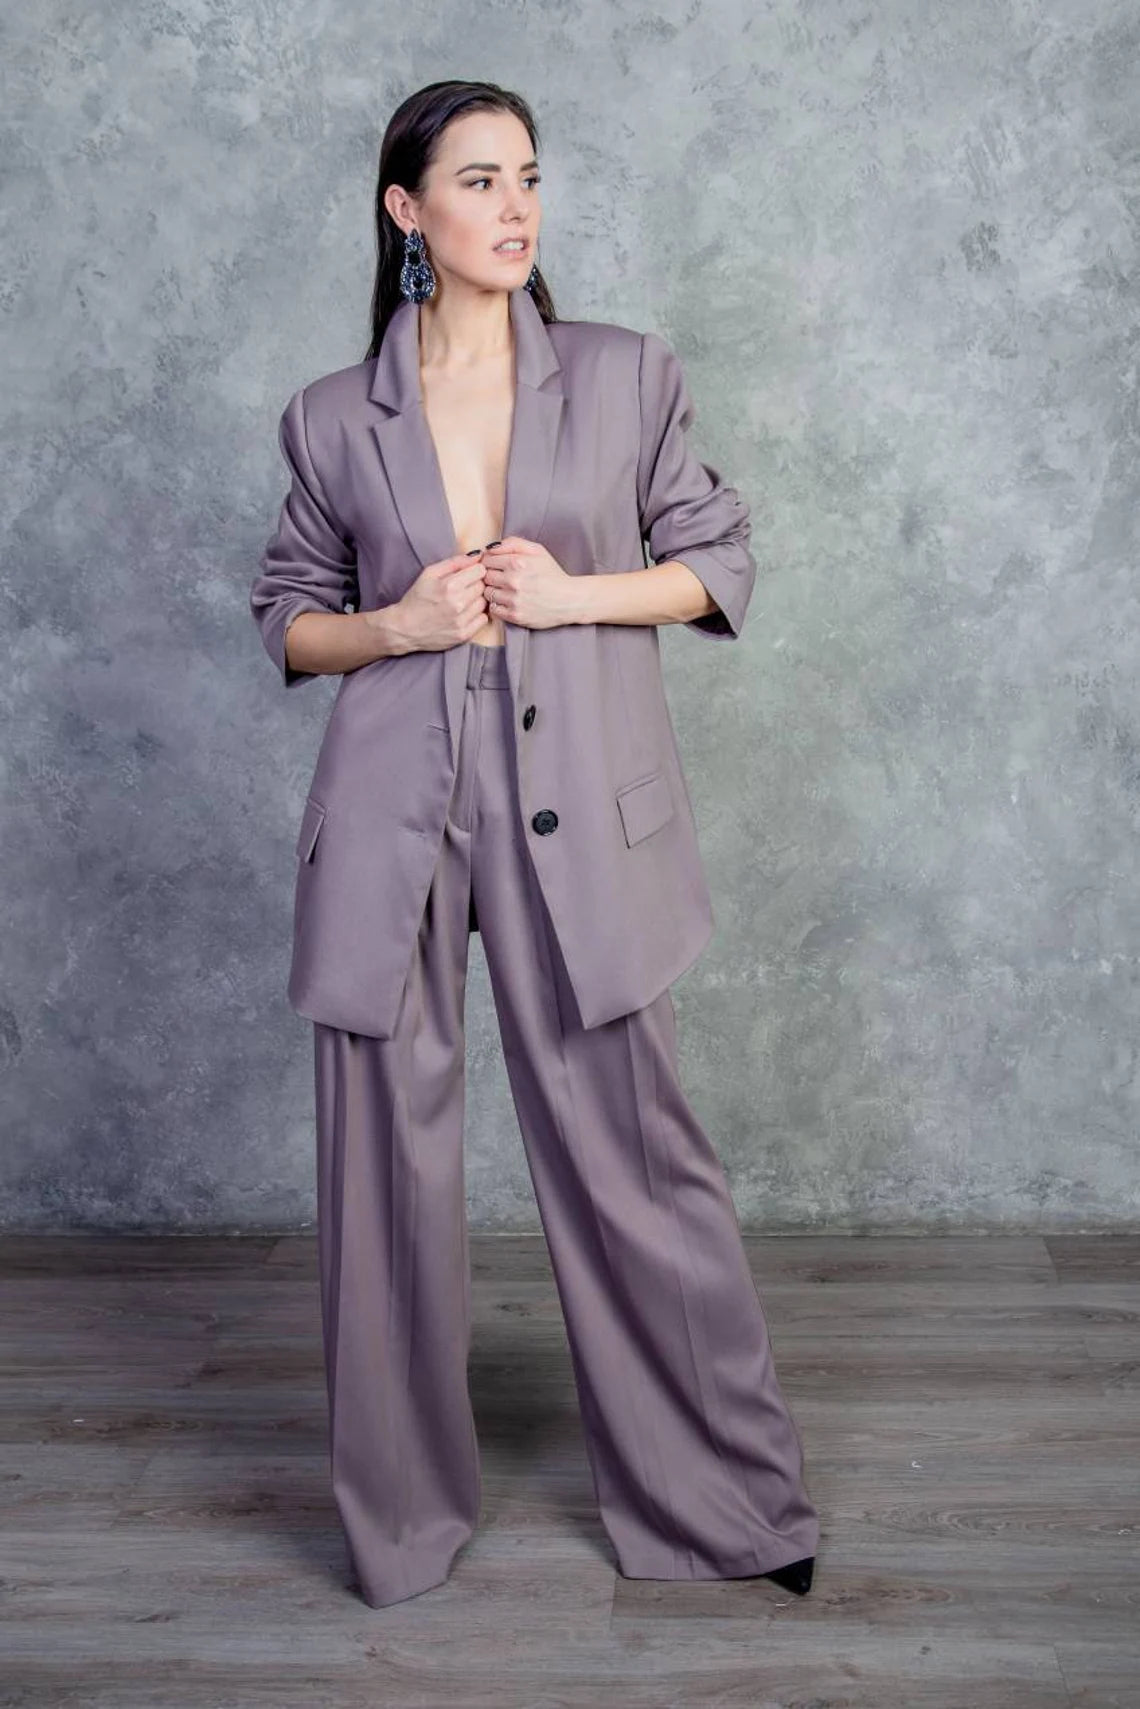 Suit. Women trouser suit. Trousers with pleats on the front and